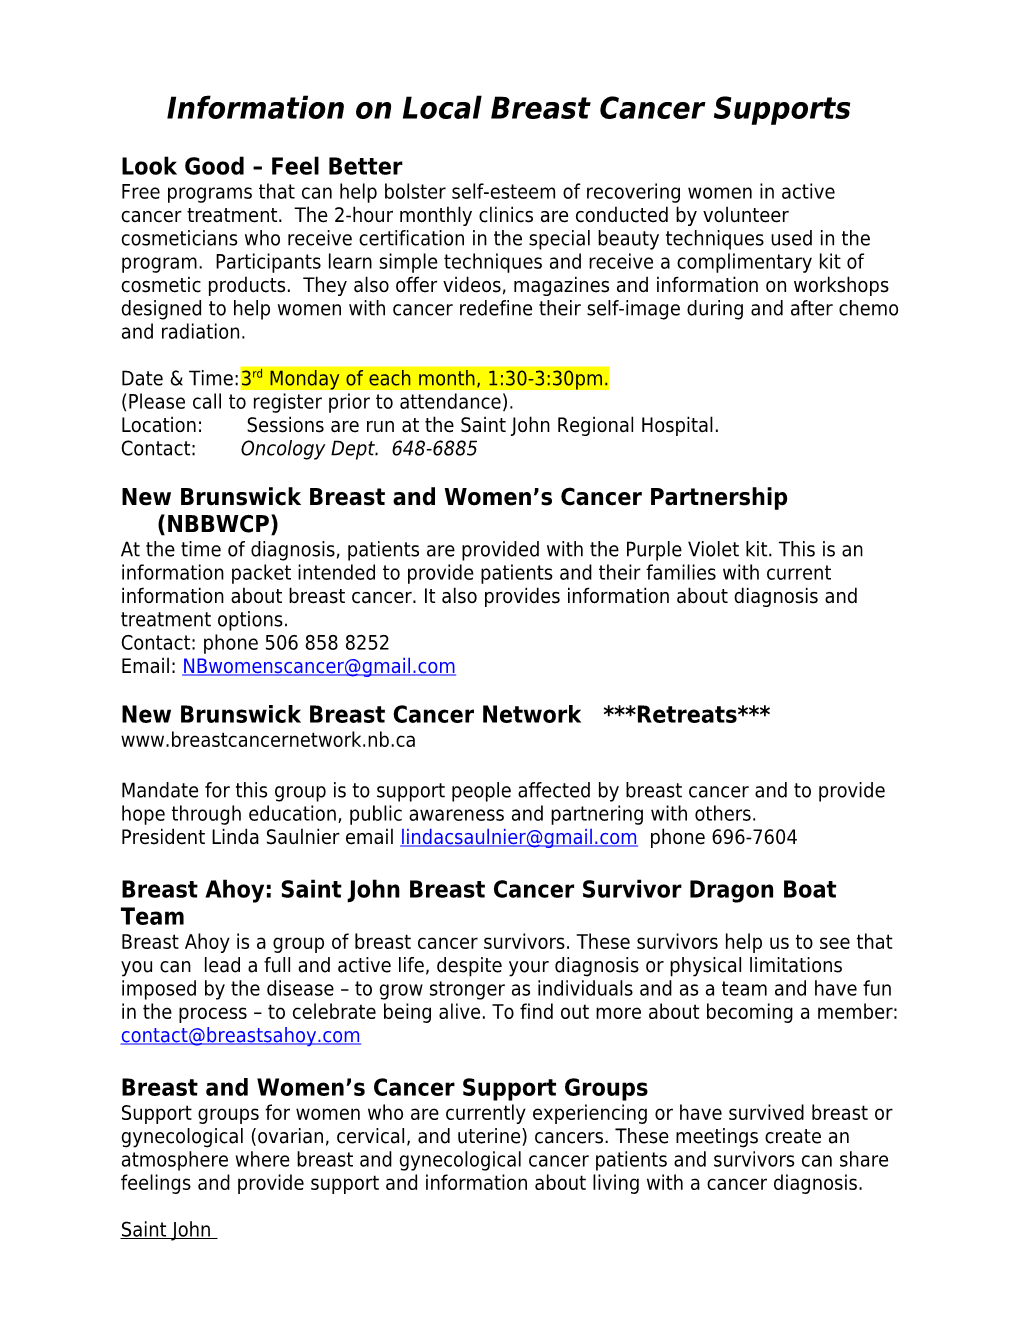 *Information on Local Breast Cancer Supports